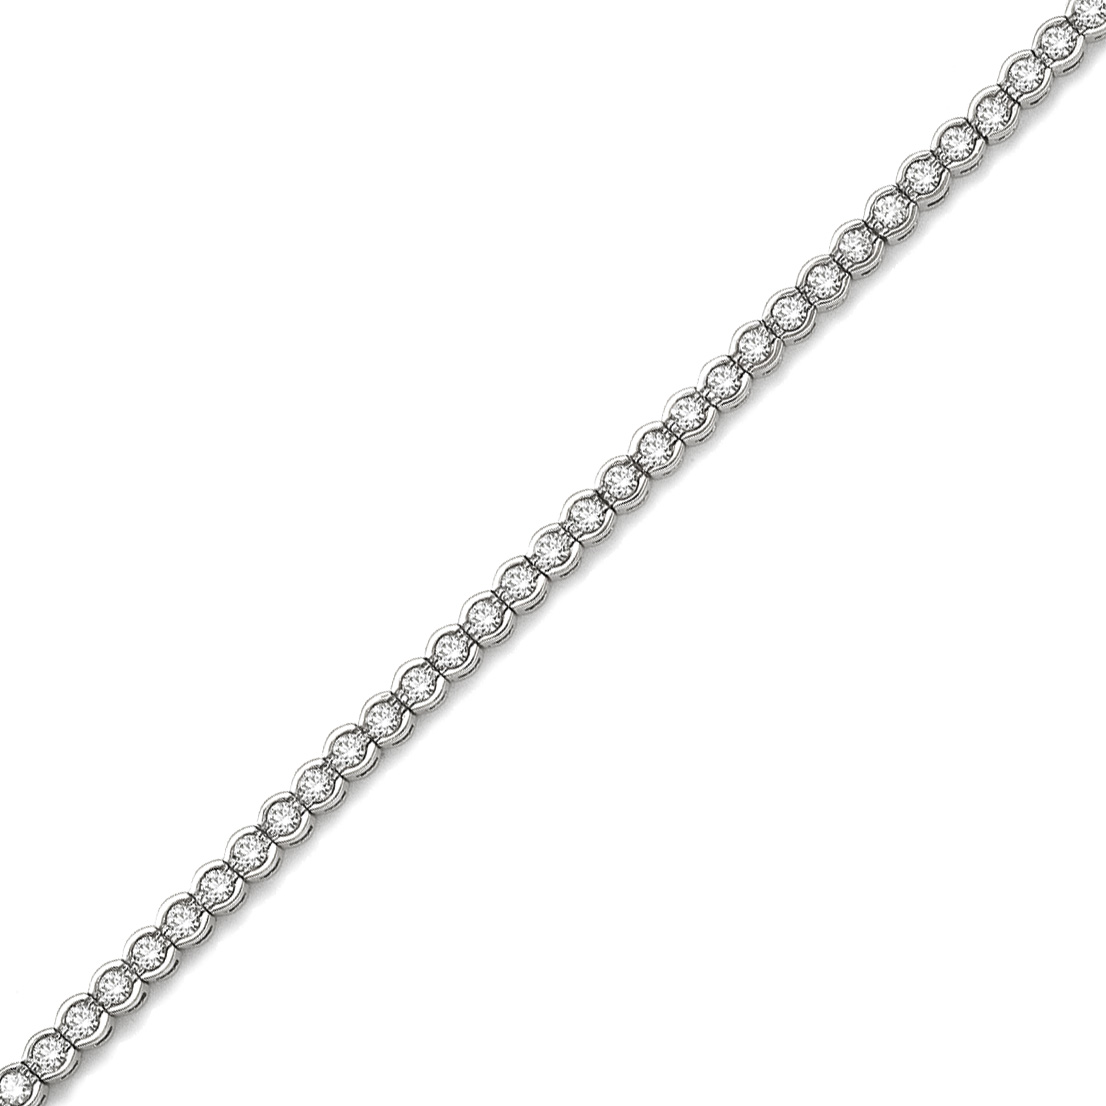 14K solid white gold tennis bracelet with natural round diamonds.  3.00 carat total weight of dia...